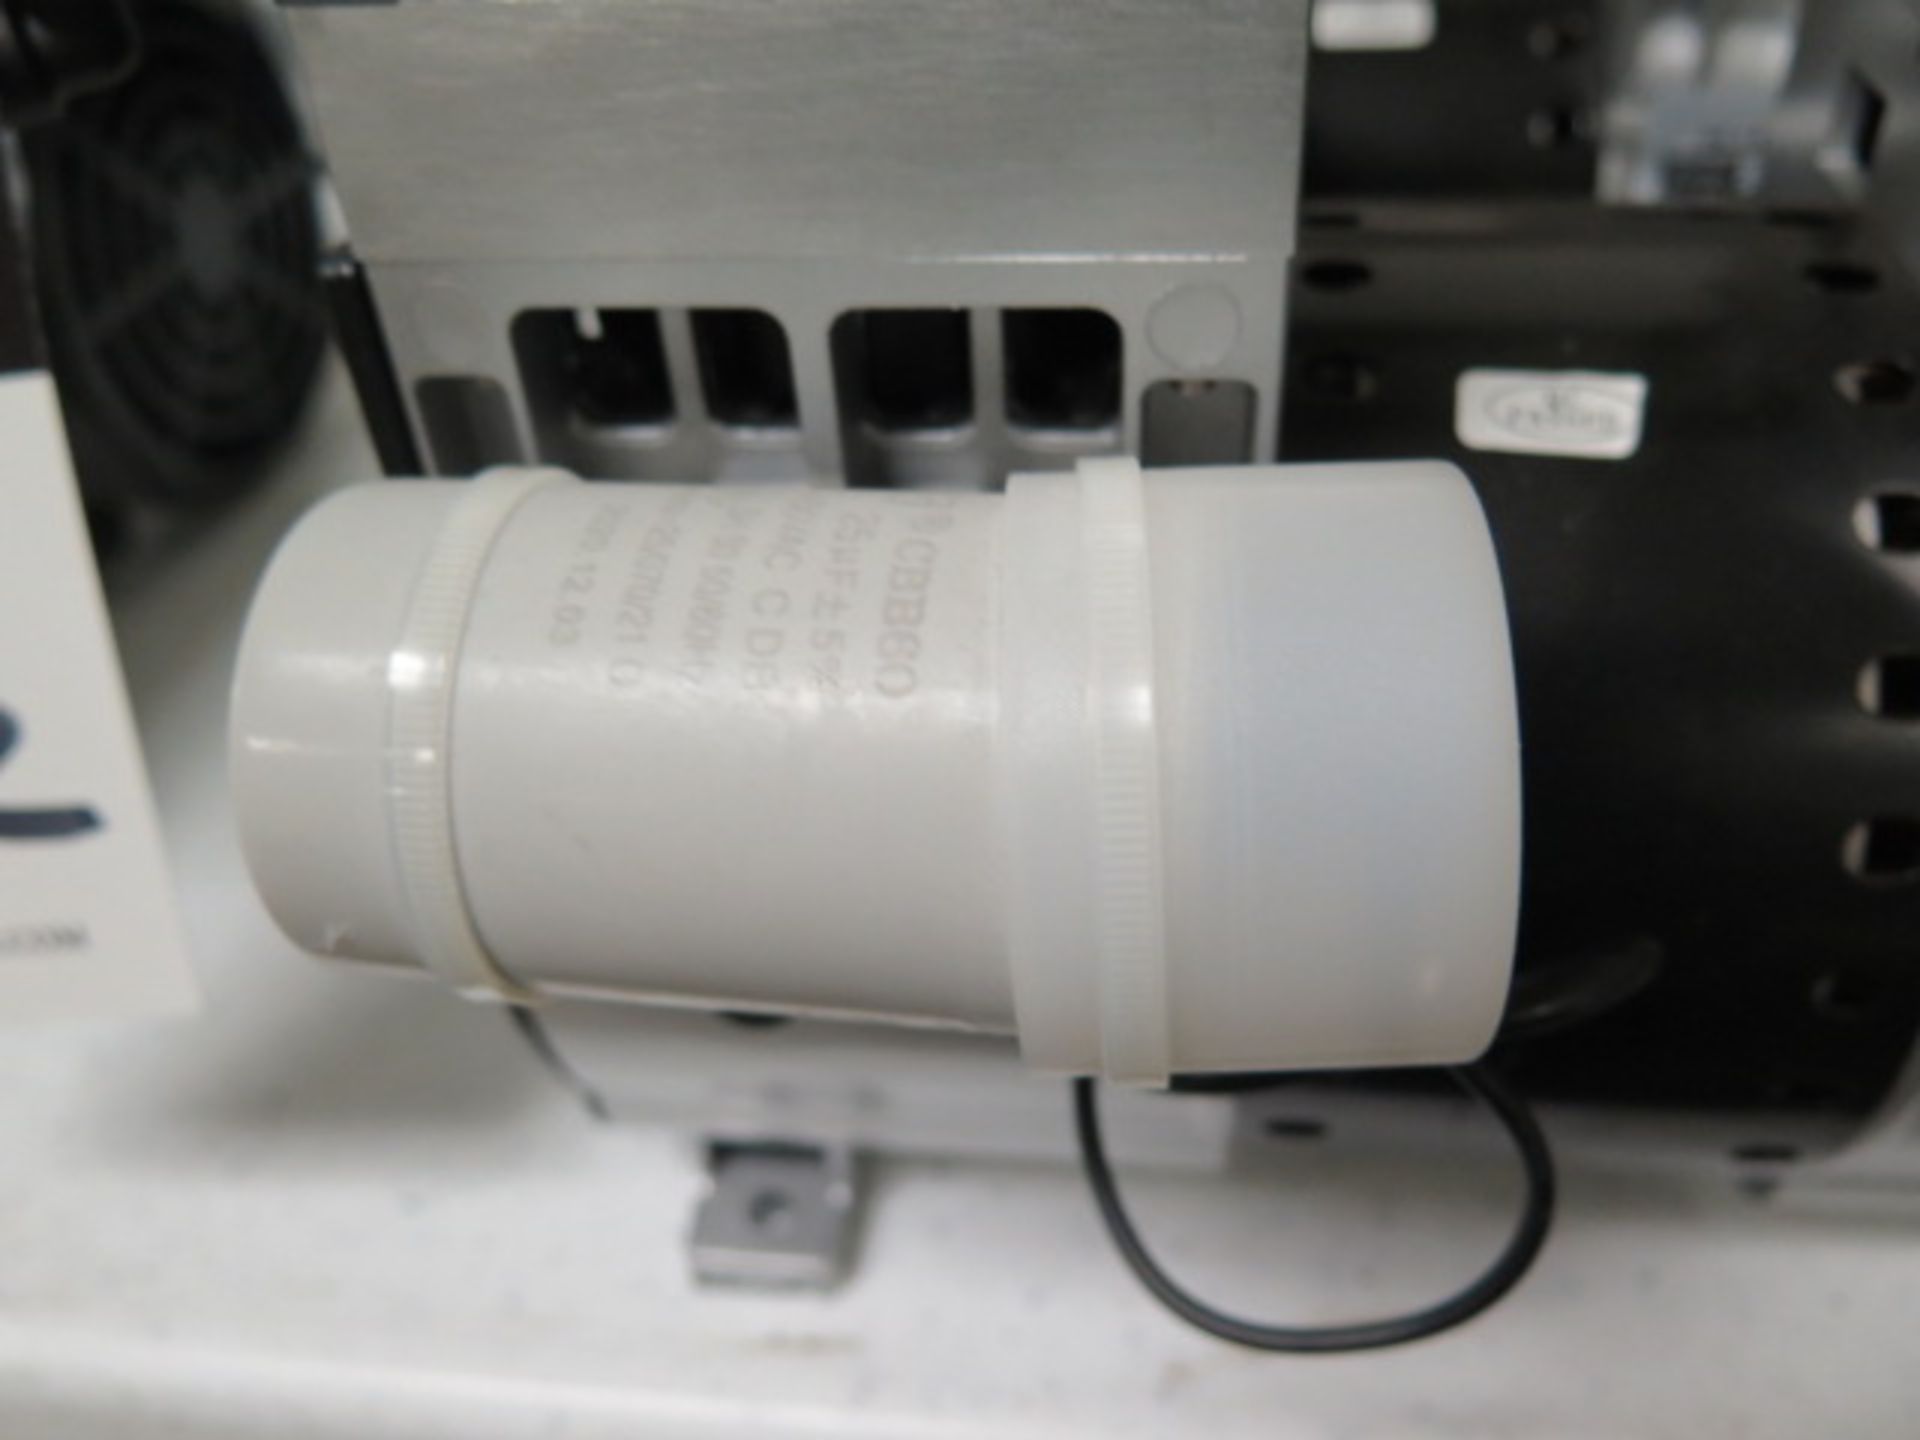 Airtech HP-200V 80 torr Vacuum Pumps (2) 200-240V (SOLD AS-IS - NO WARRANTY) - Image 4 of 5